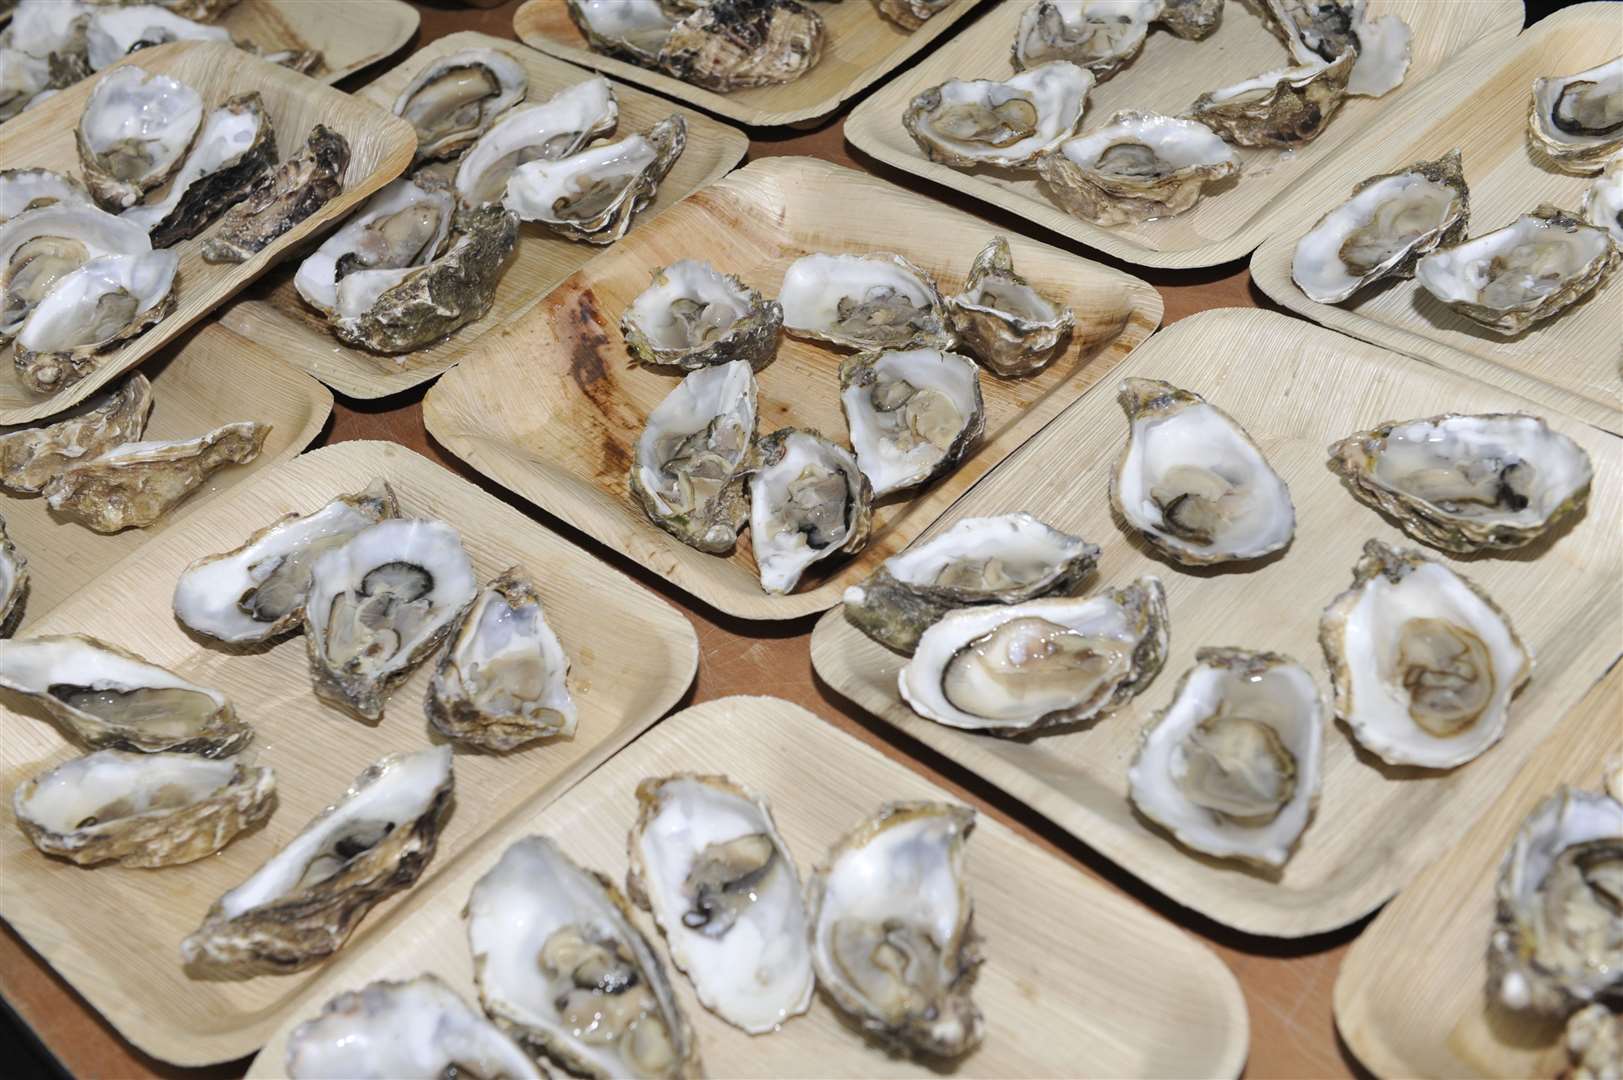 More people have reportedly fallen ill after eating Whitstable Oyster Company oysters over the weekend